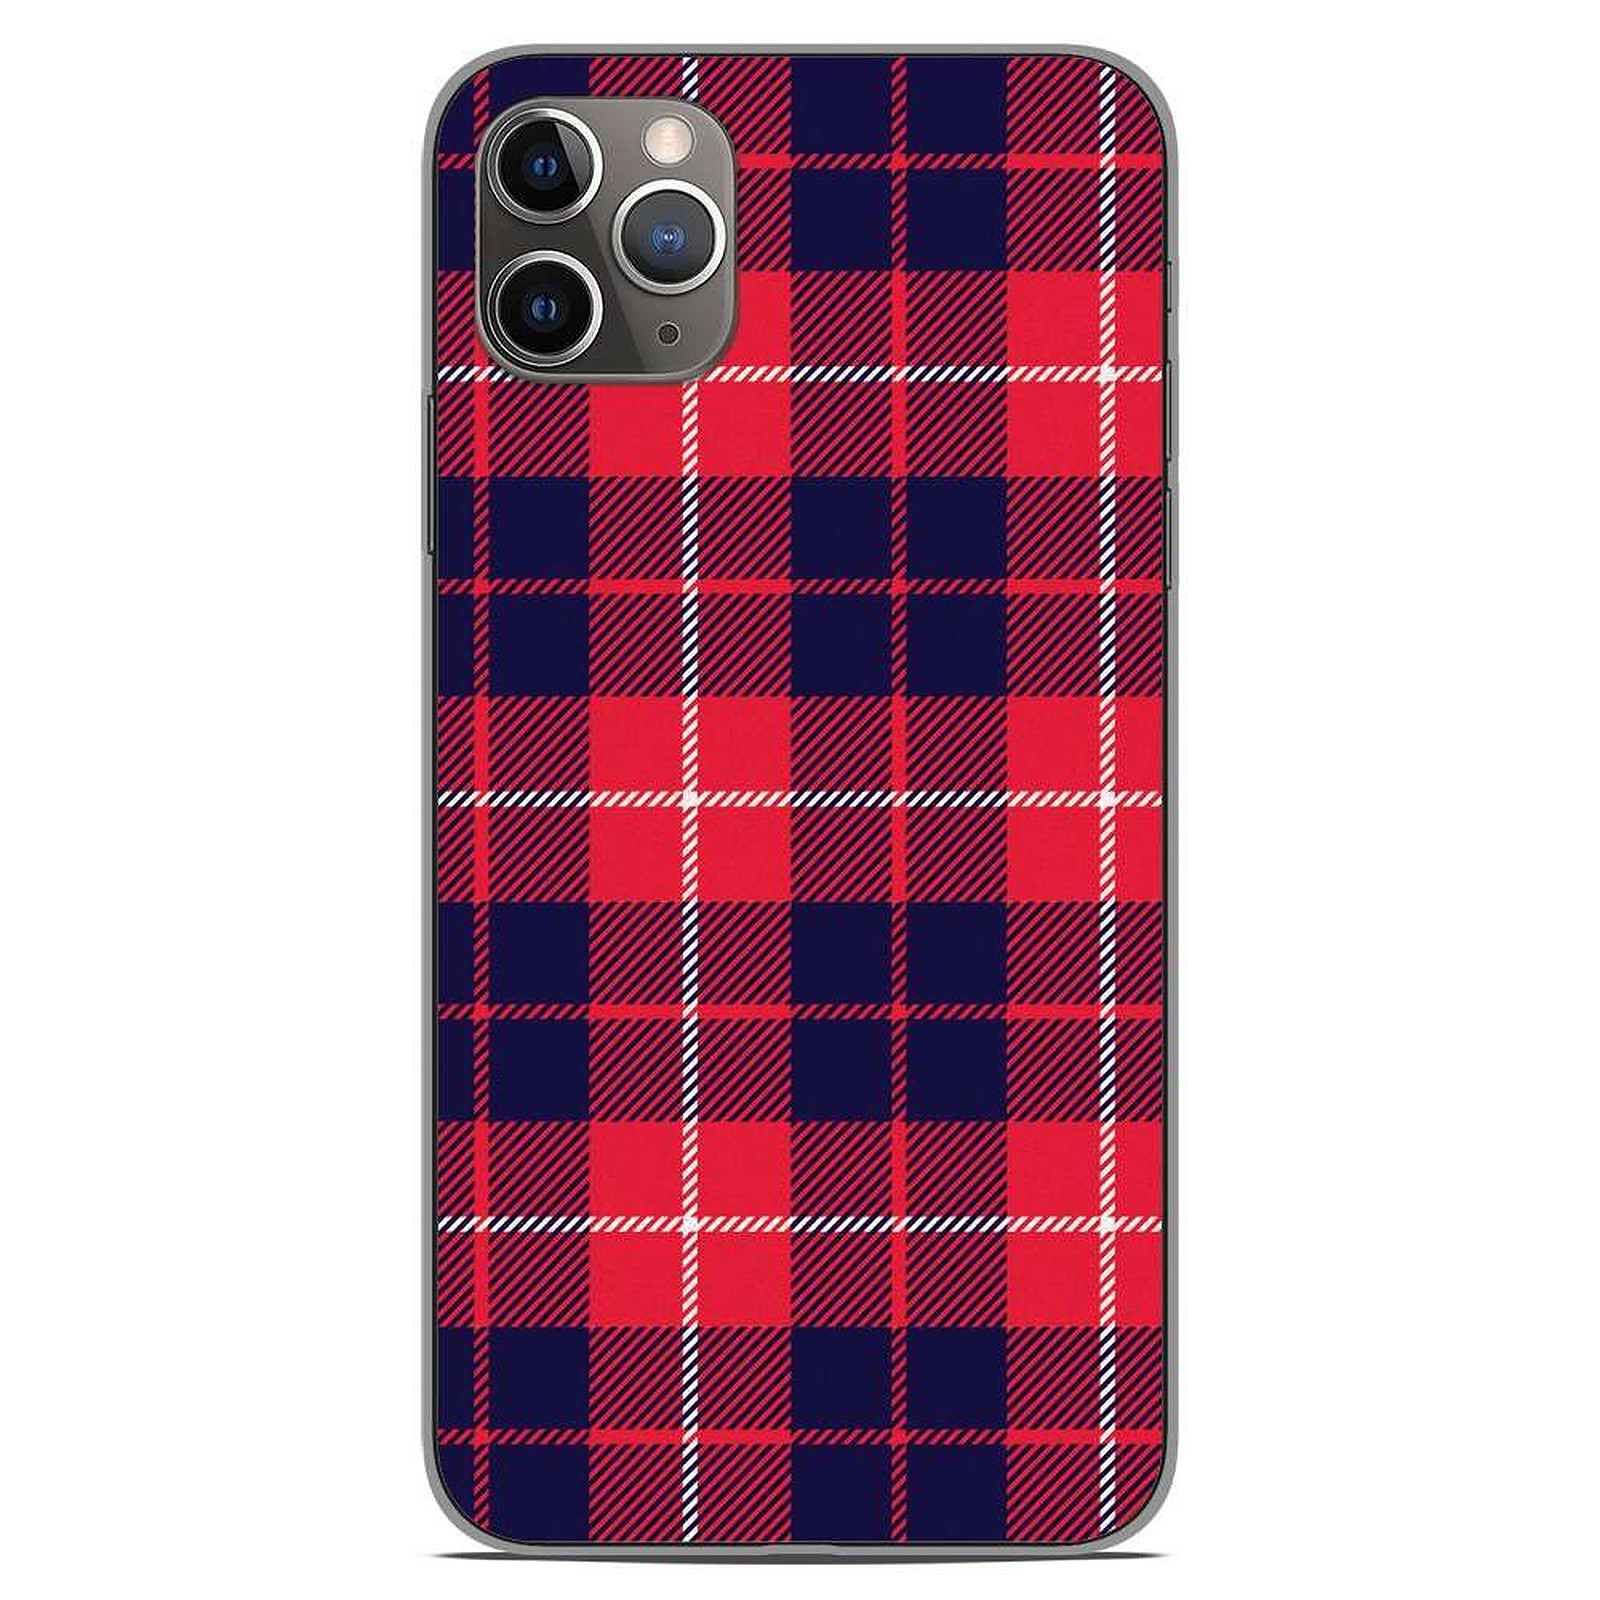 1001 Coques Coque silicone gel Apple iPhone 11 Pro Max motif Tartan Rouge 2 - Coque telephone 1001Coques